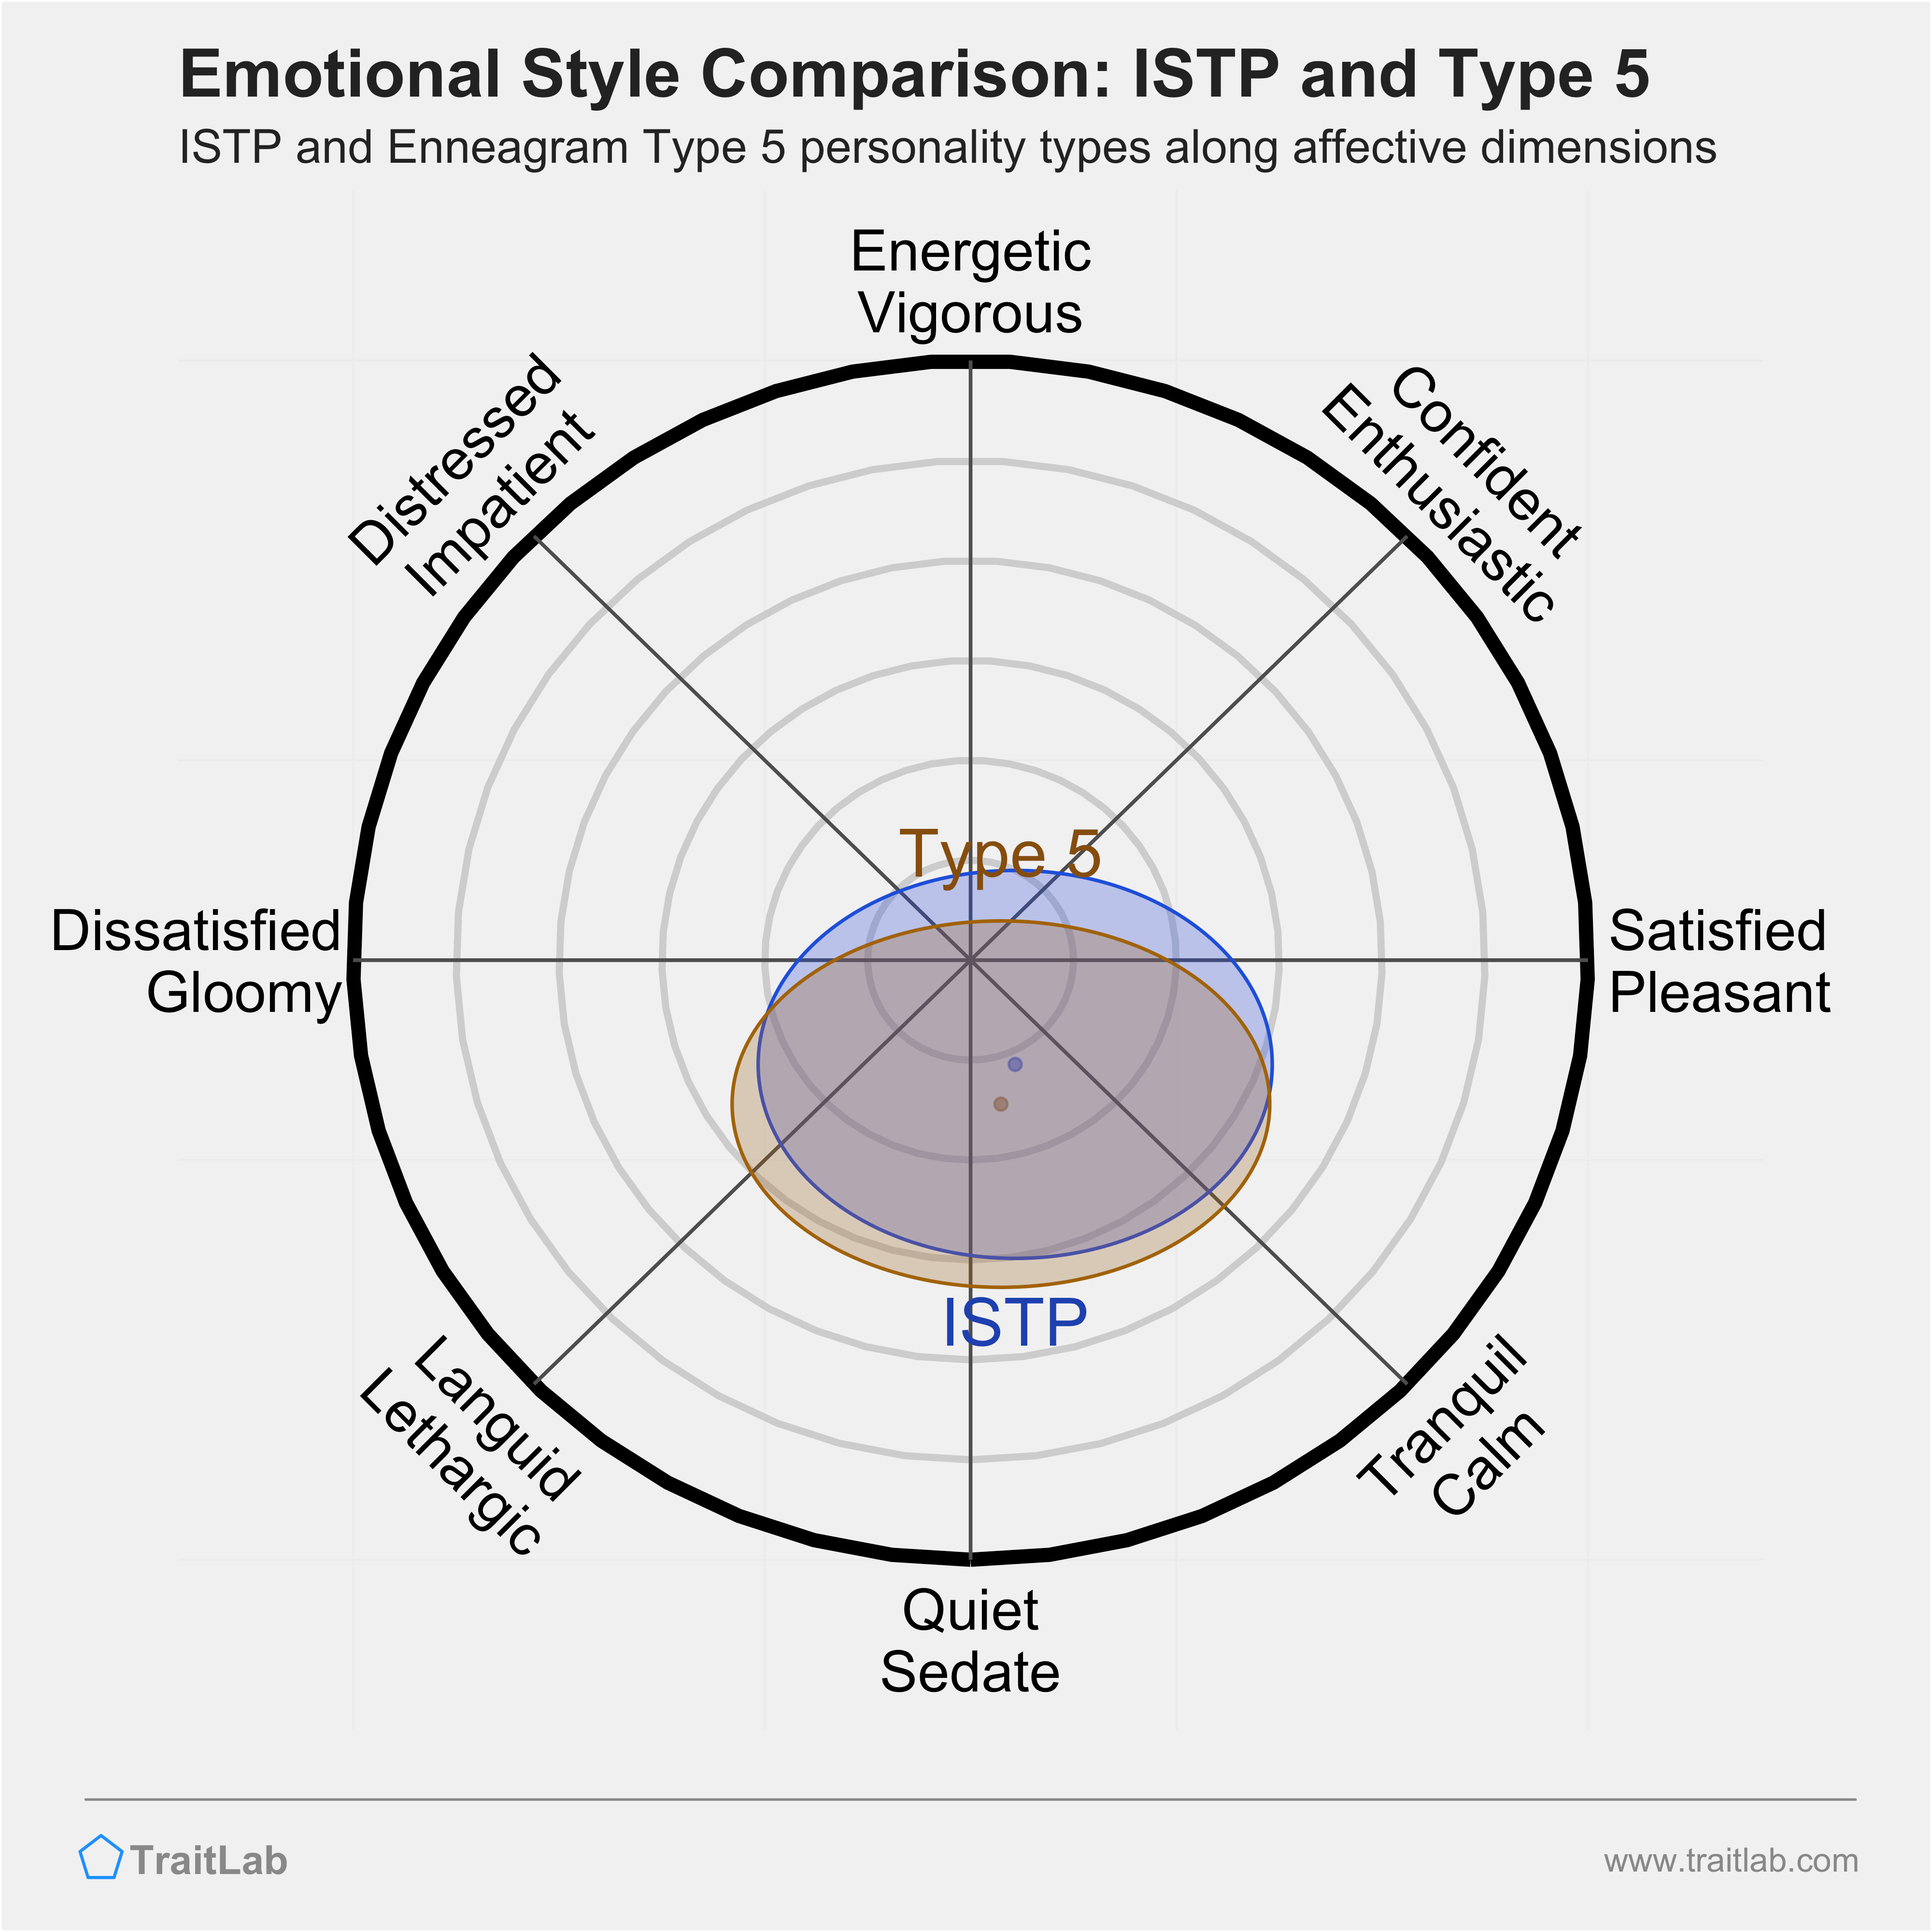 ISTP and Type 5 comparison across emotional (affective) dimensions